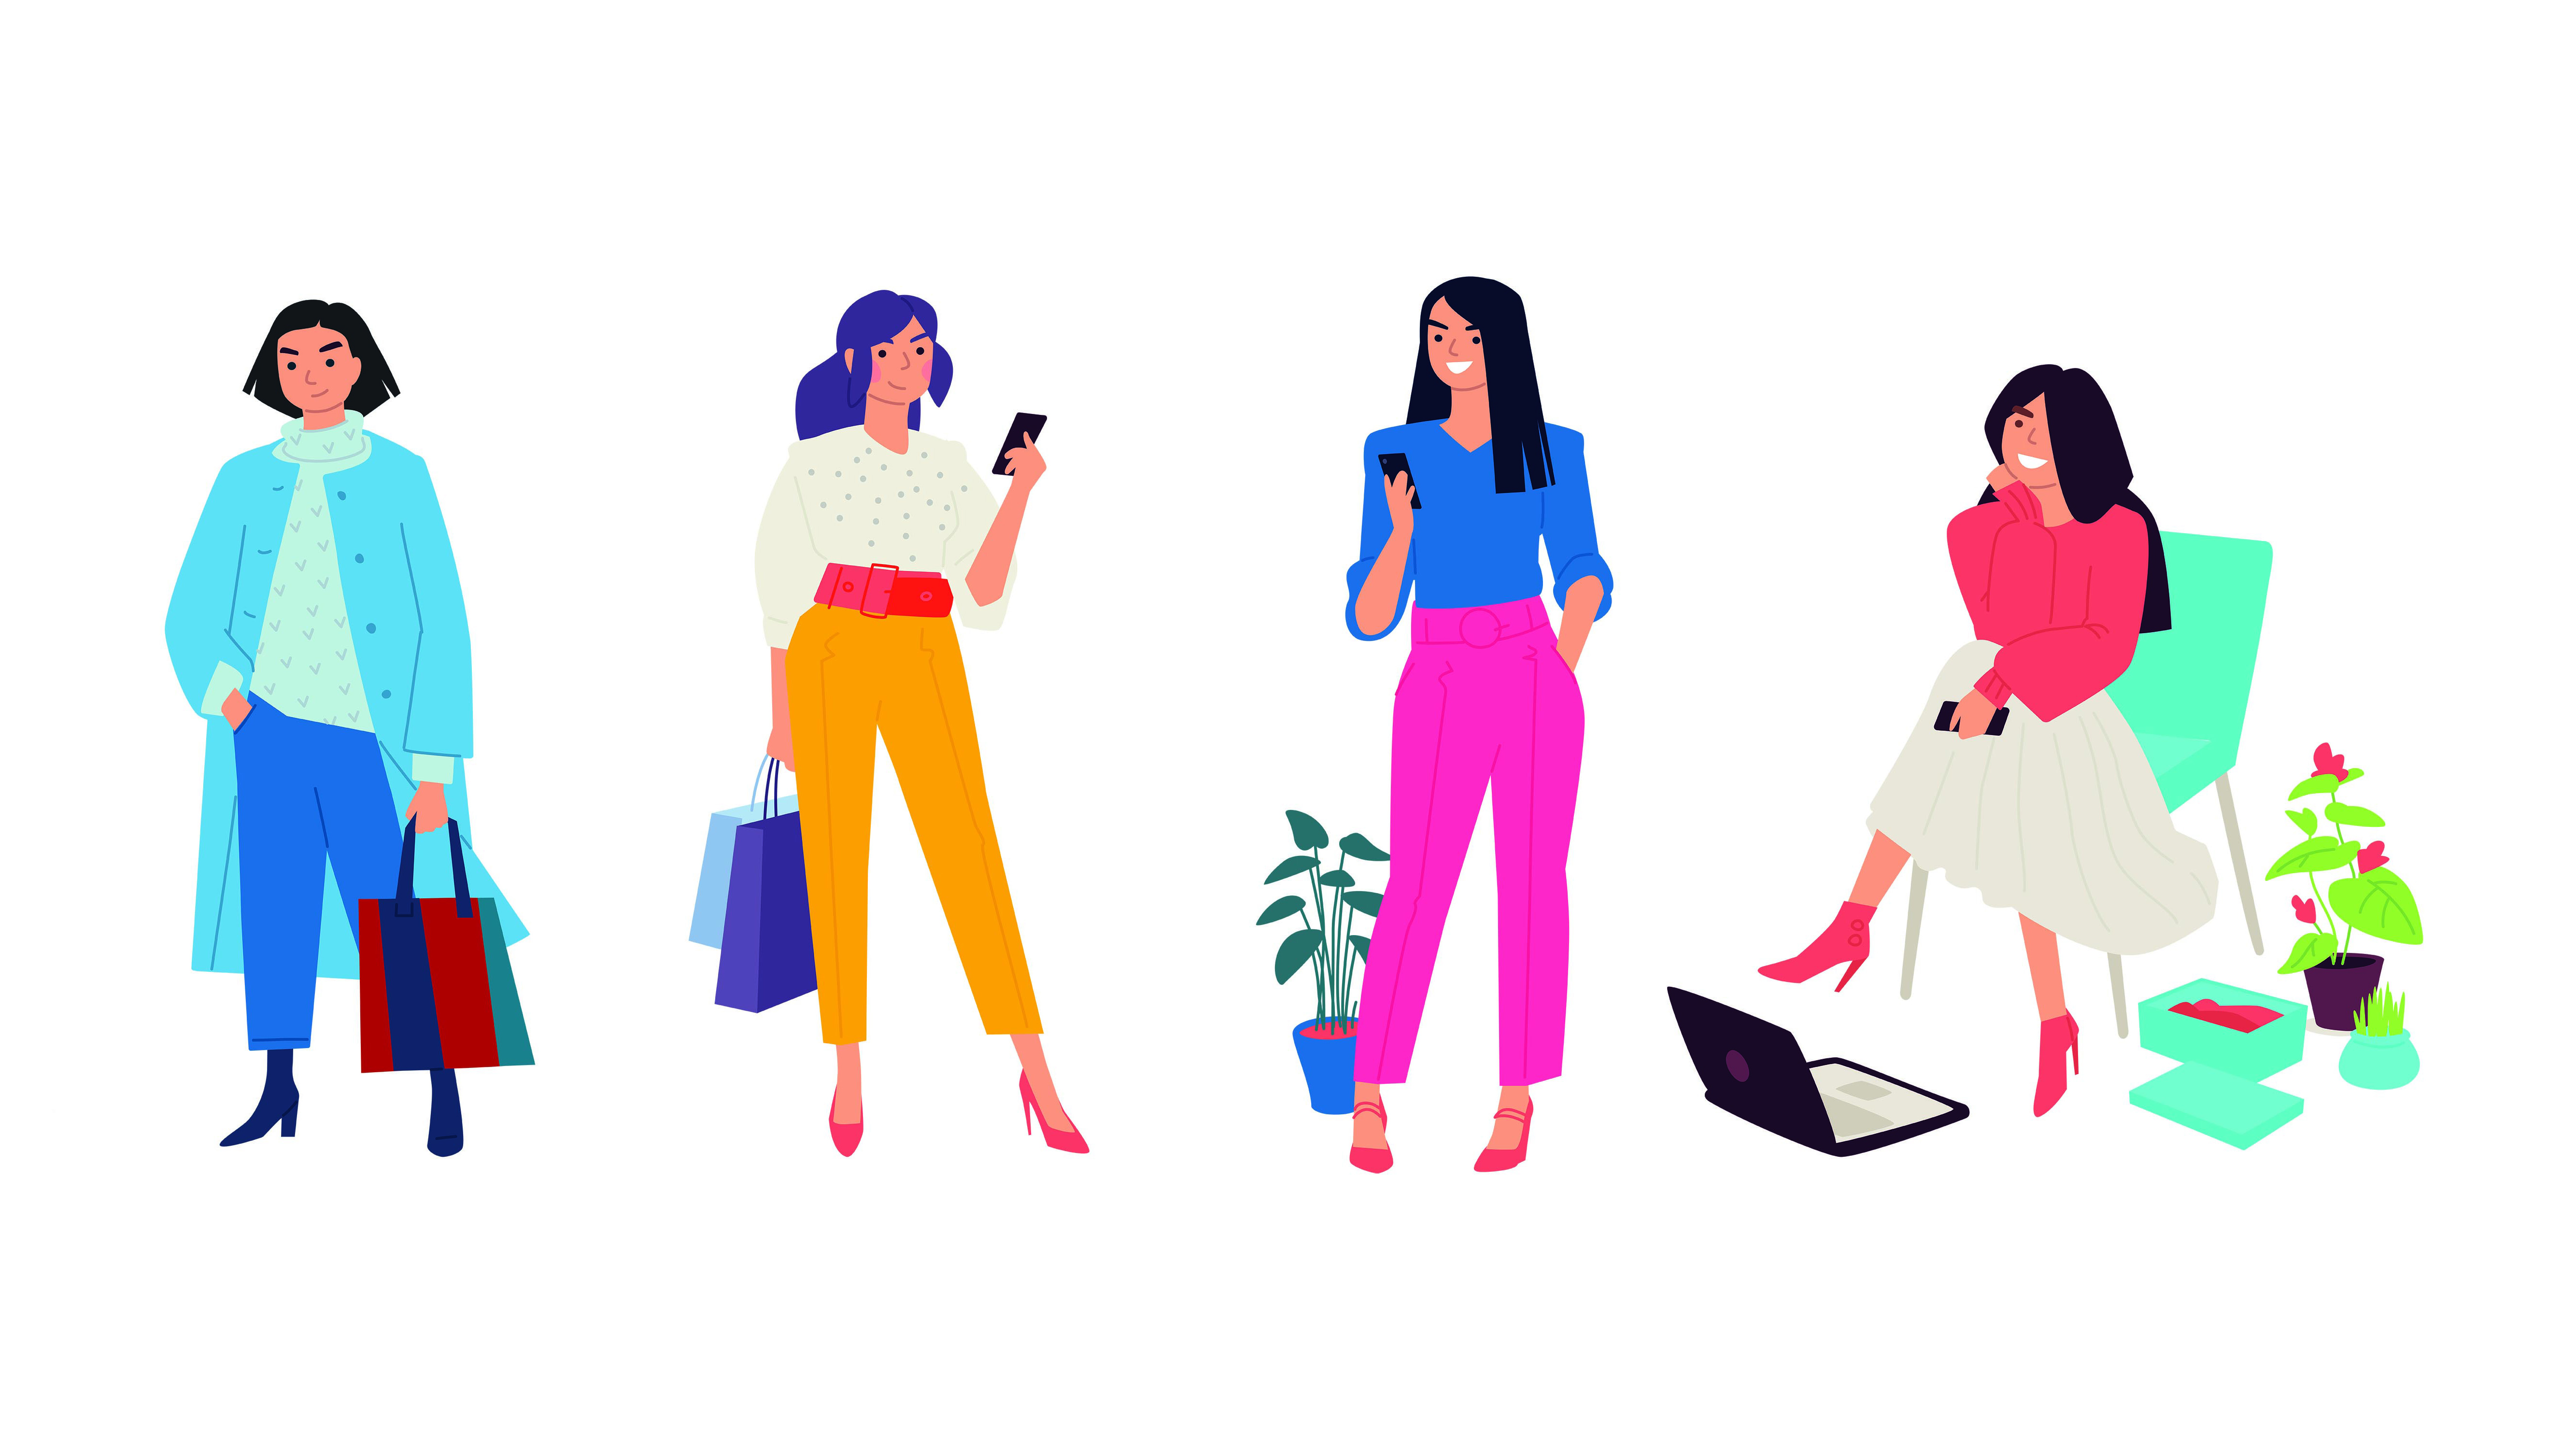 Illustration of fashionable girls in bright clothes. Vector. Women go about their business. Casual style of dress. Flat style. Image is isolated on a white background.